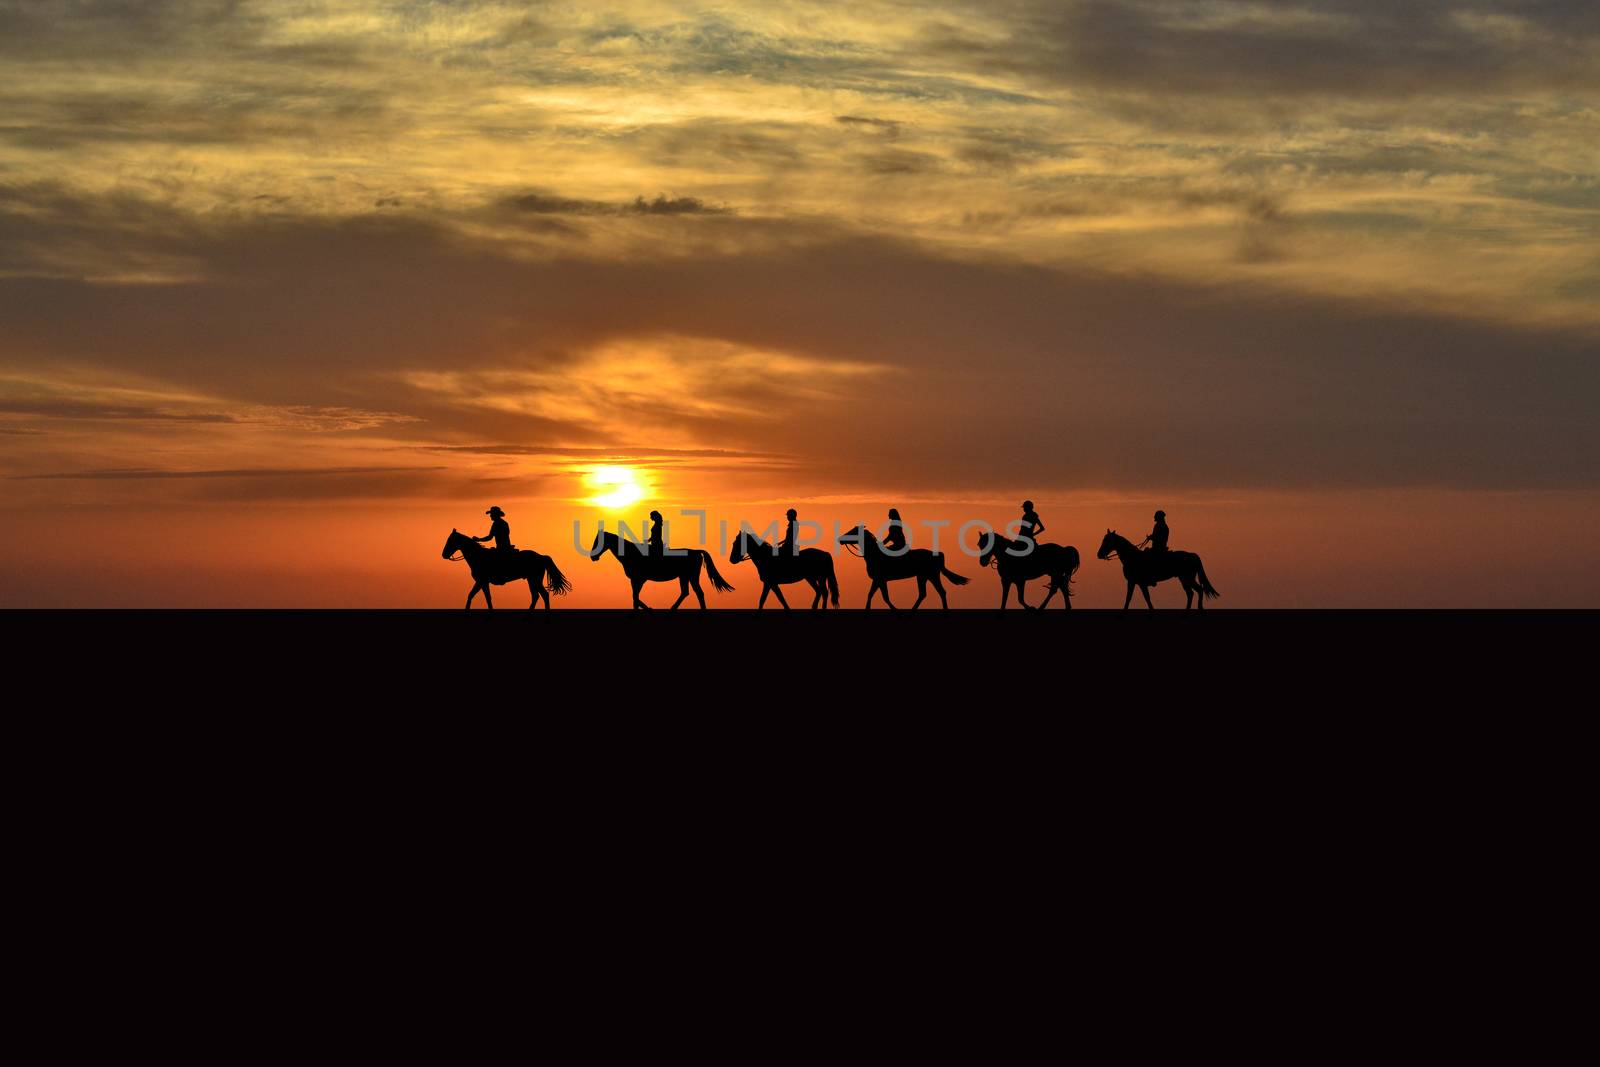 Horse rider silhouettes at sunset by hibrida13